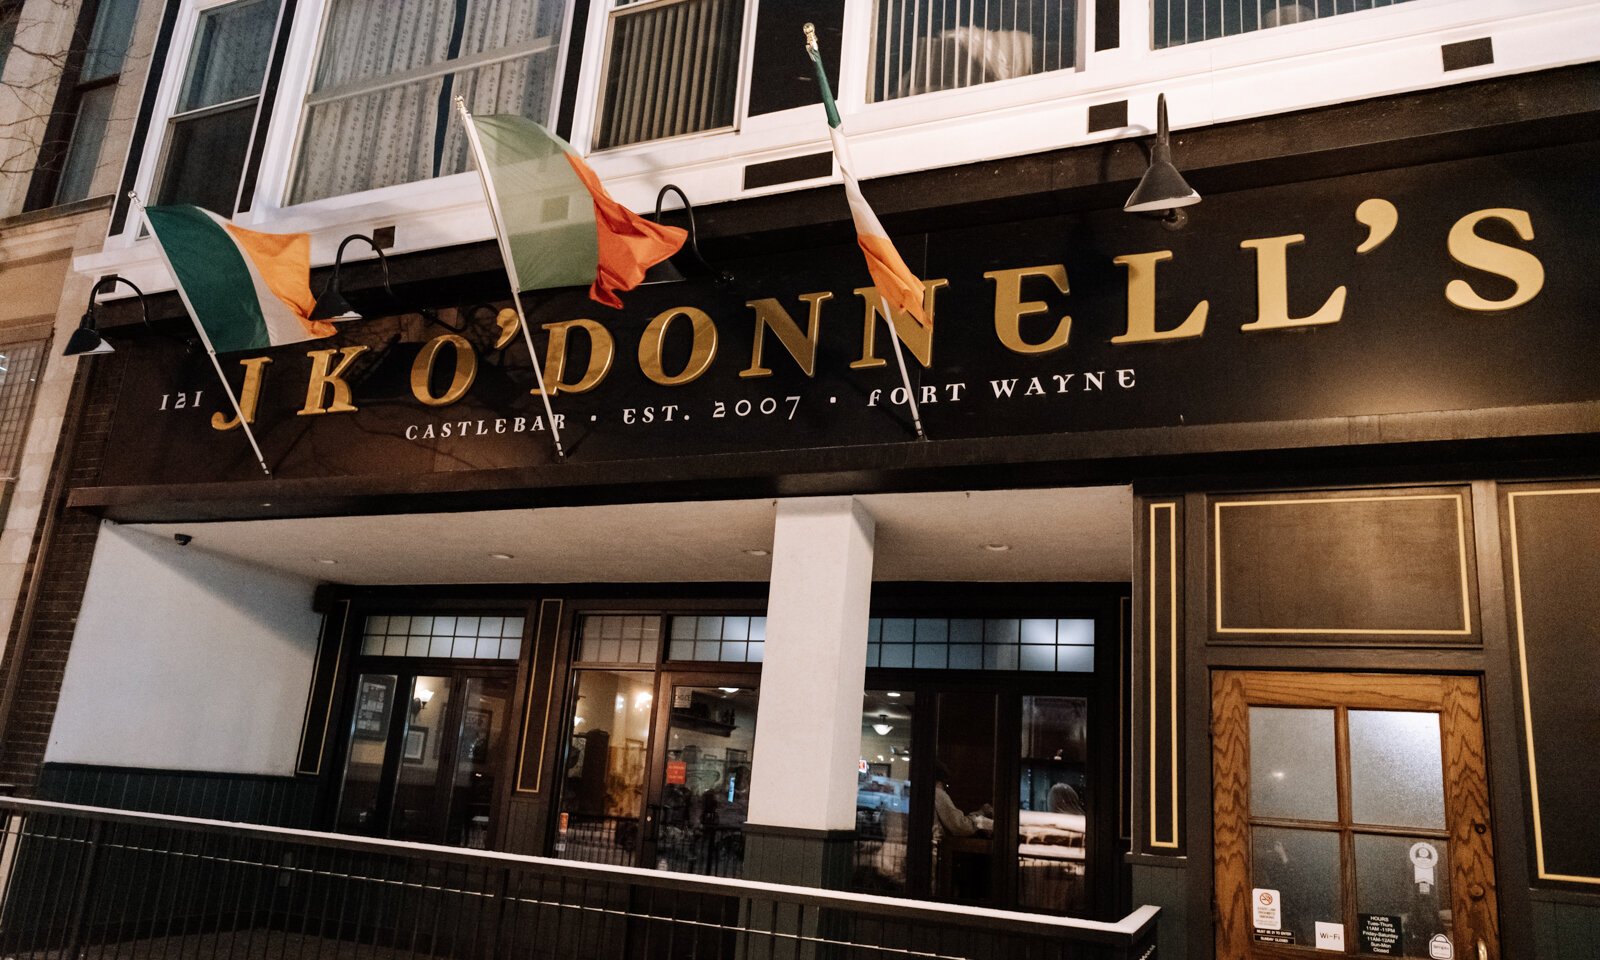 J.K. O'Donnell's is located at 121 W. Wayne St. in the heart of Downtown Fort Wayne.